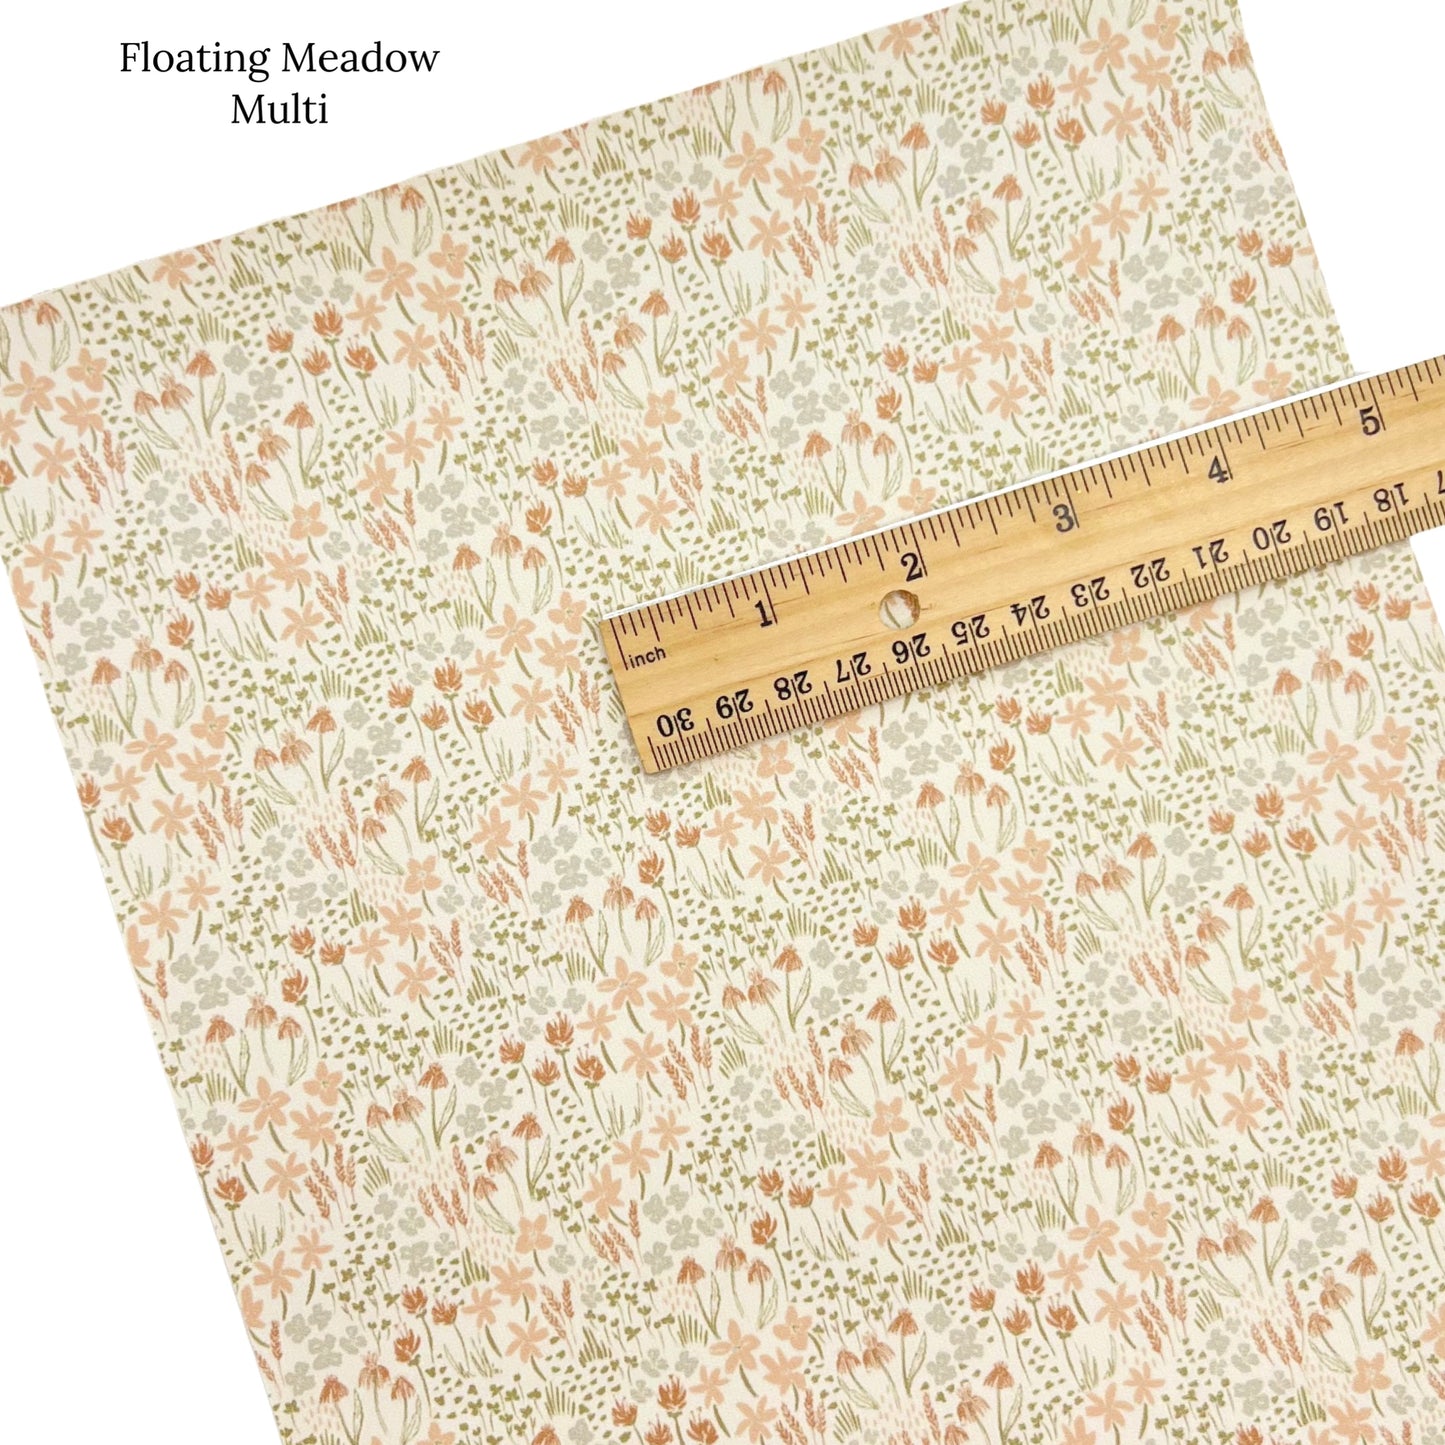 Floating Meadow Faux Leather Sheets